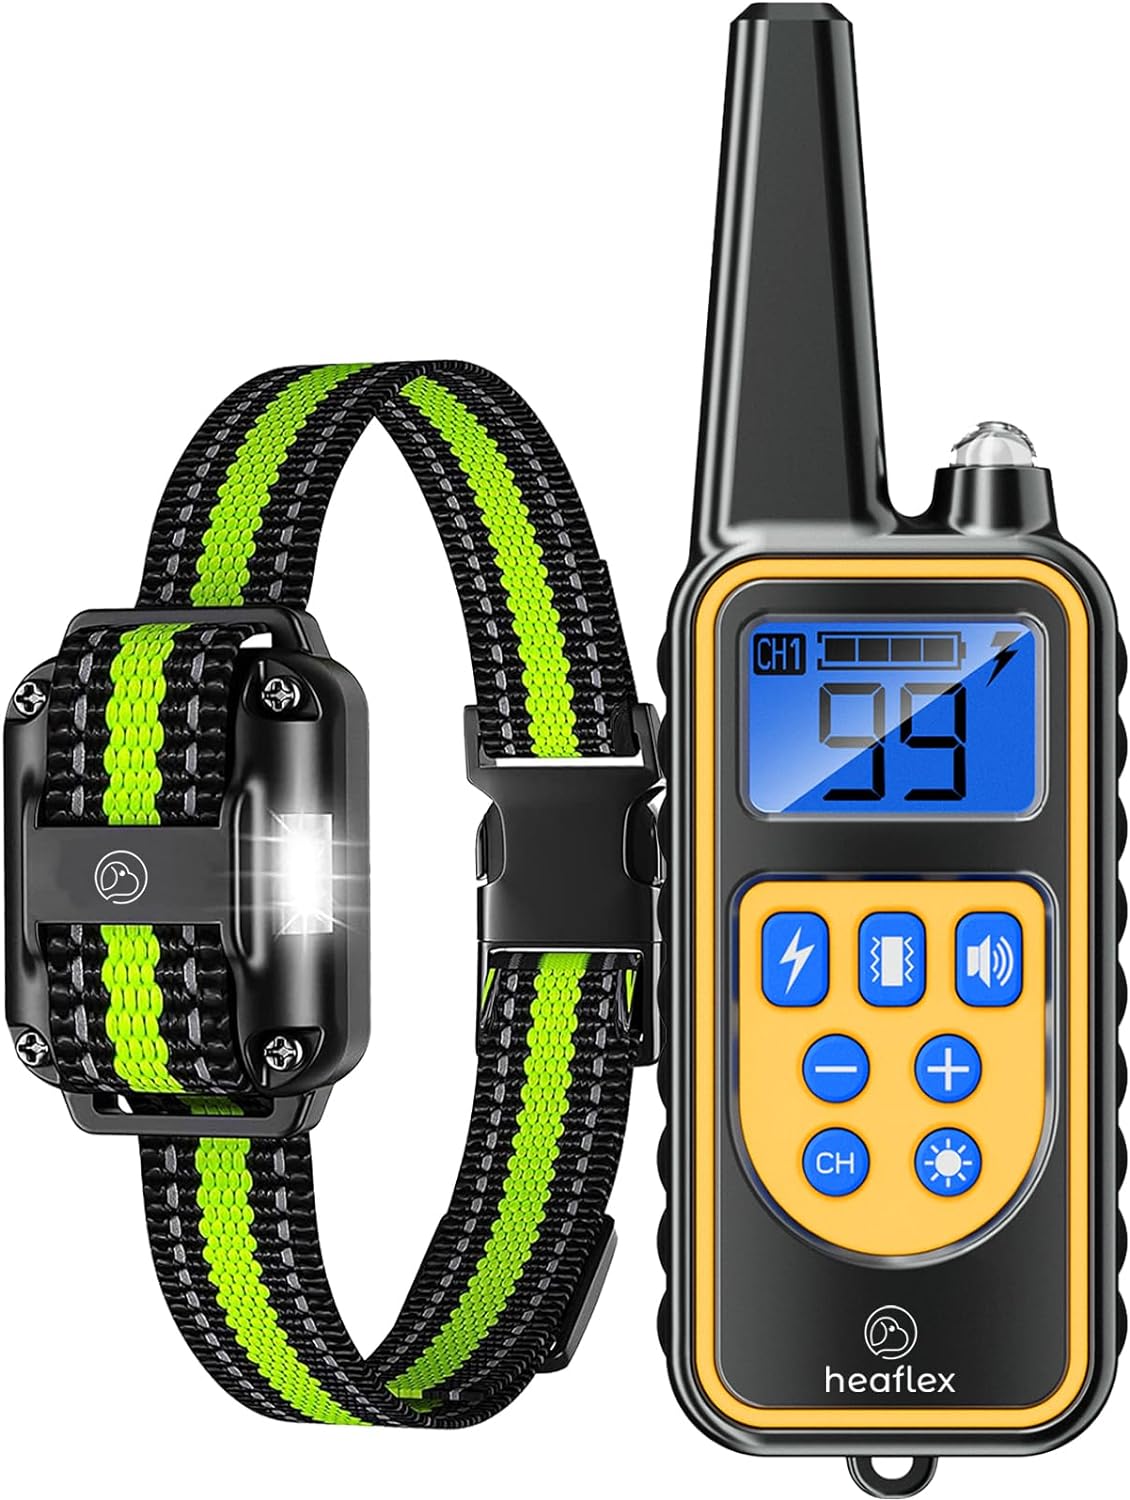 Heaflex Dog Shock Collar with Remote, Dog Training Electric Collar, Waterproof Rechargeable, 1640ft Dog Shock Collar with LED Light, Beep, Vibration, Shock for Medium/Large 3 Electronic Collars Dogs